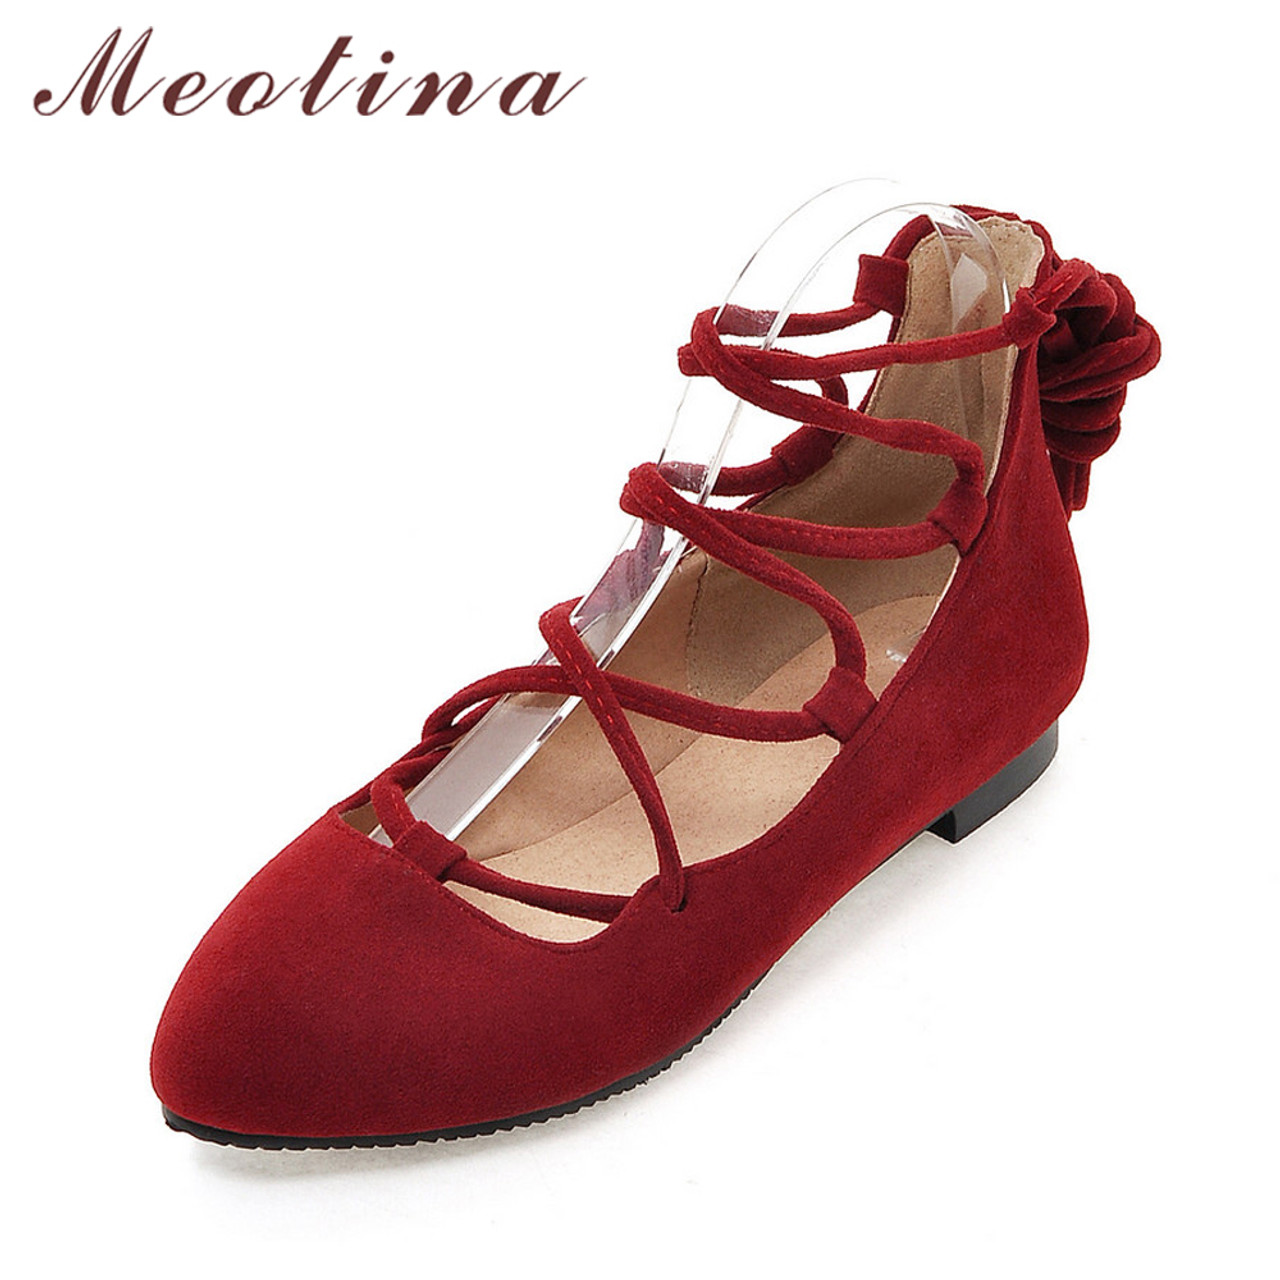 Moreschi Leather Lace-up Shoes in Maroon Purple Womens Shoes Flats and flat shoes Lace Up shoes and boots 